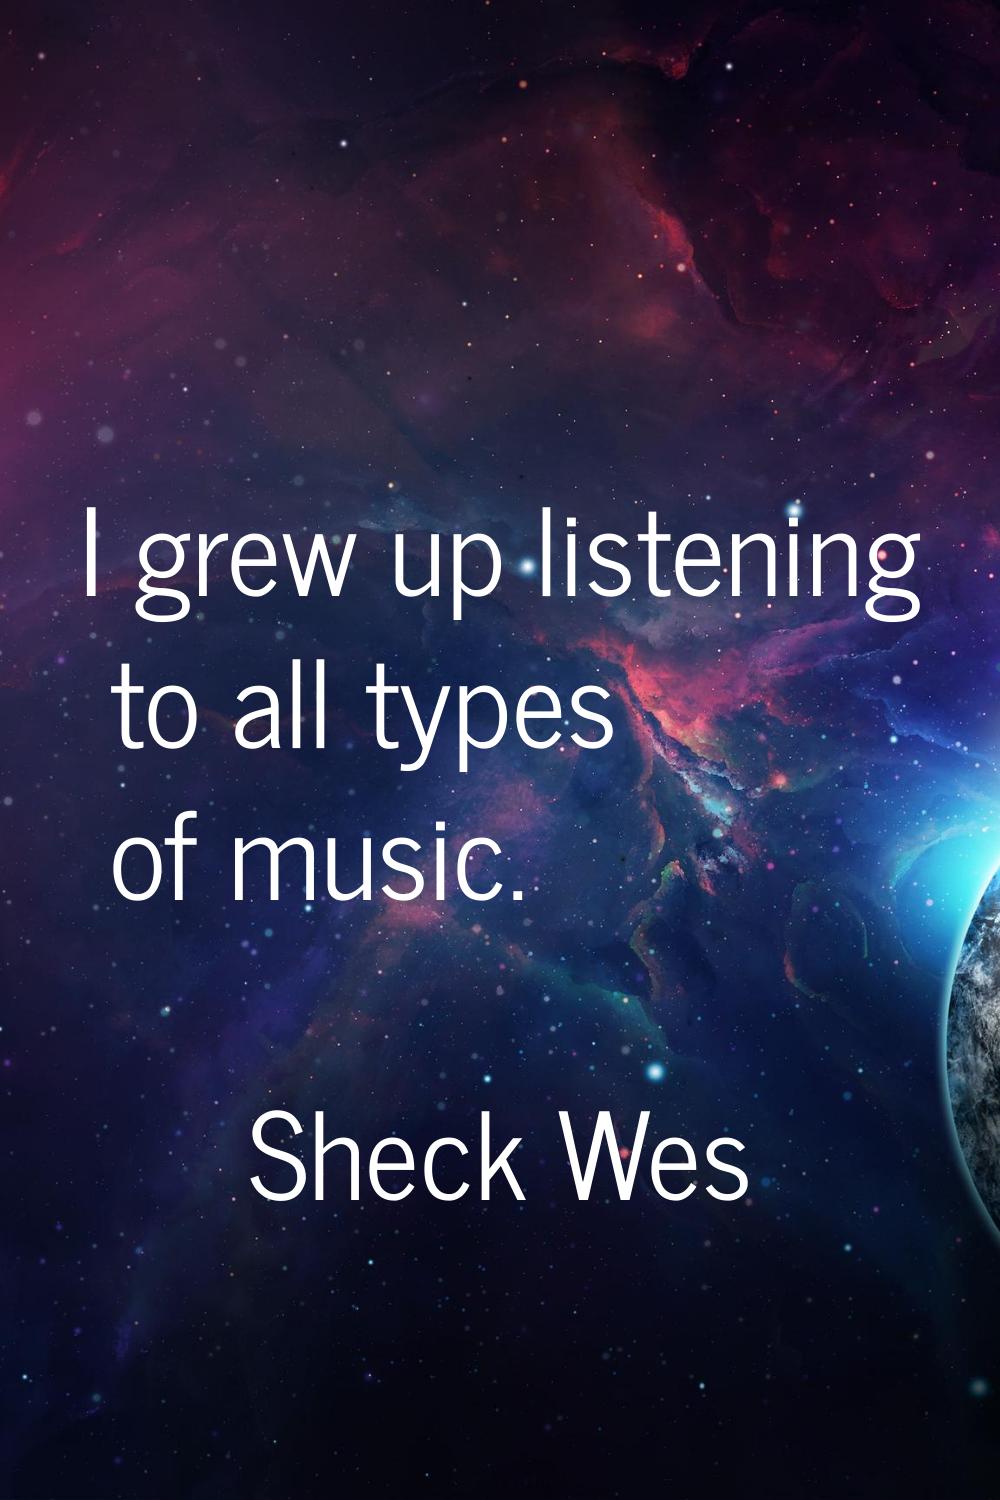 I grew up listening to all types of music.